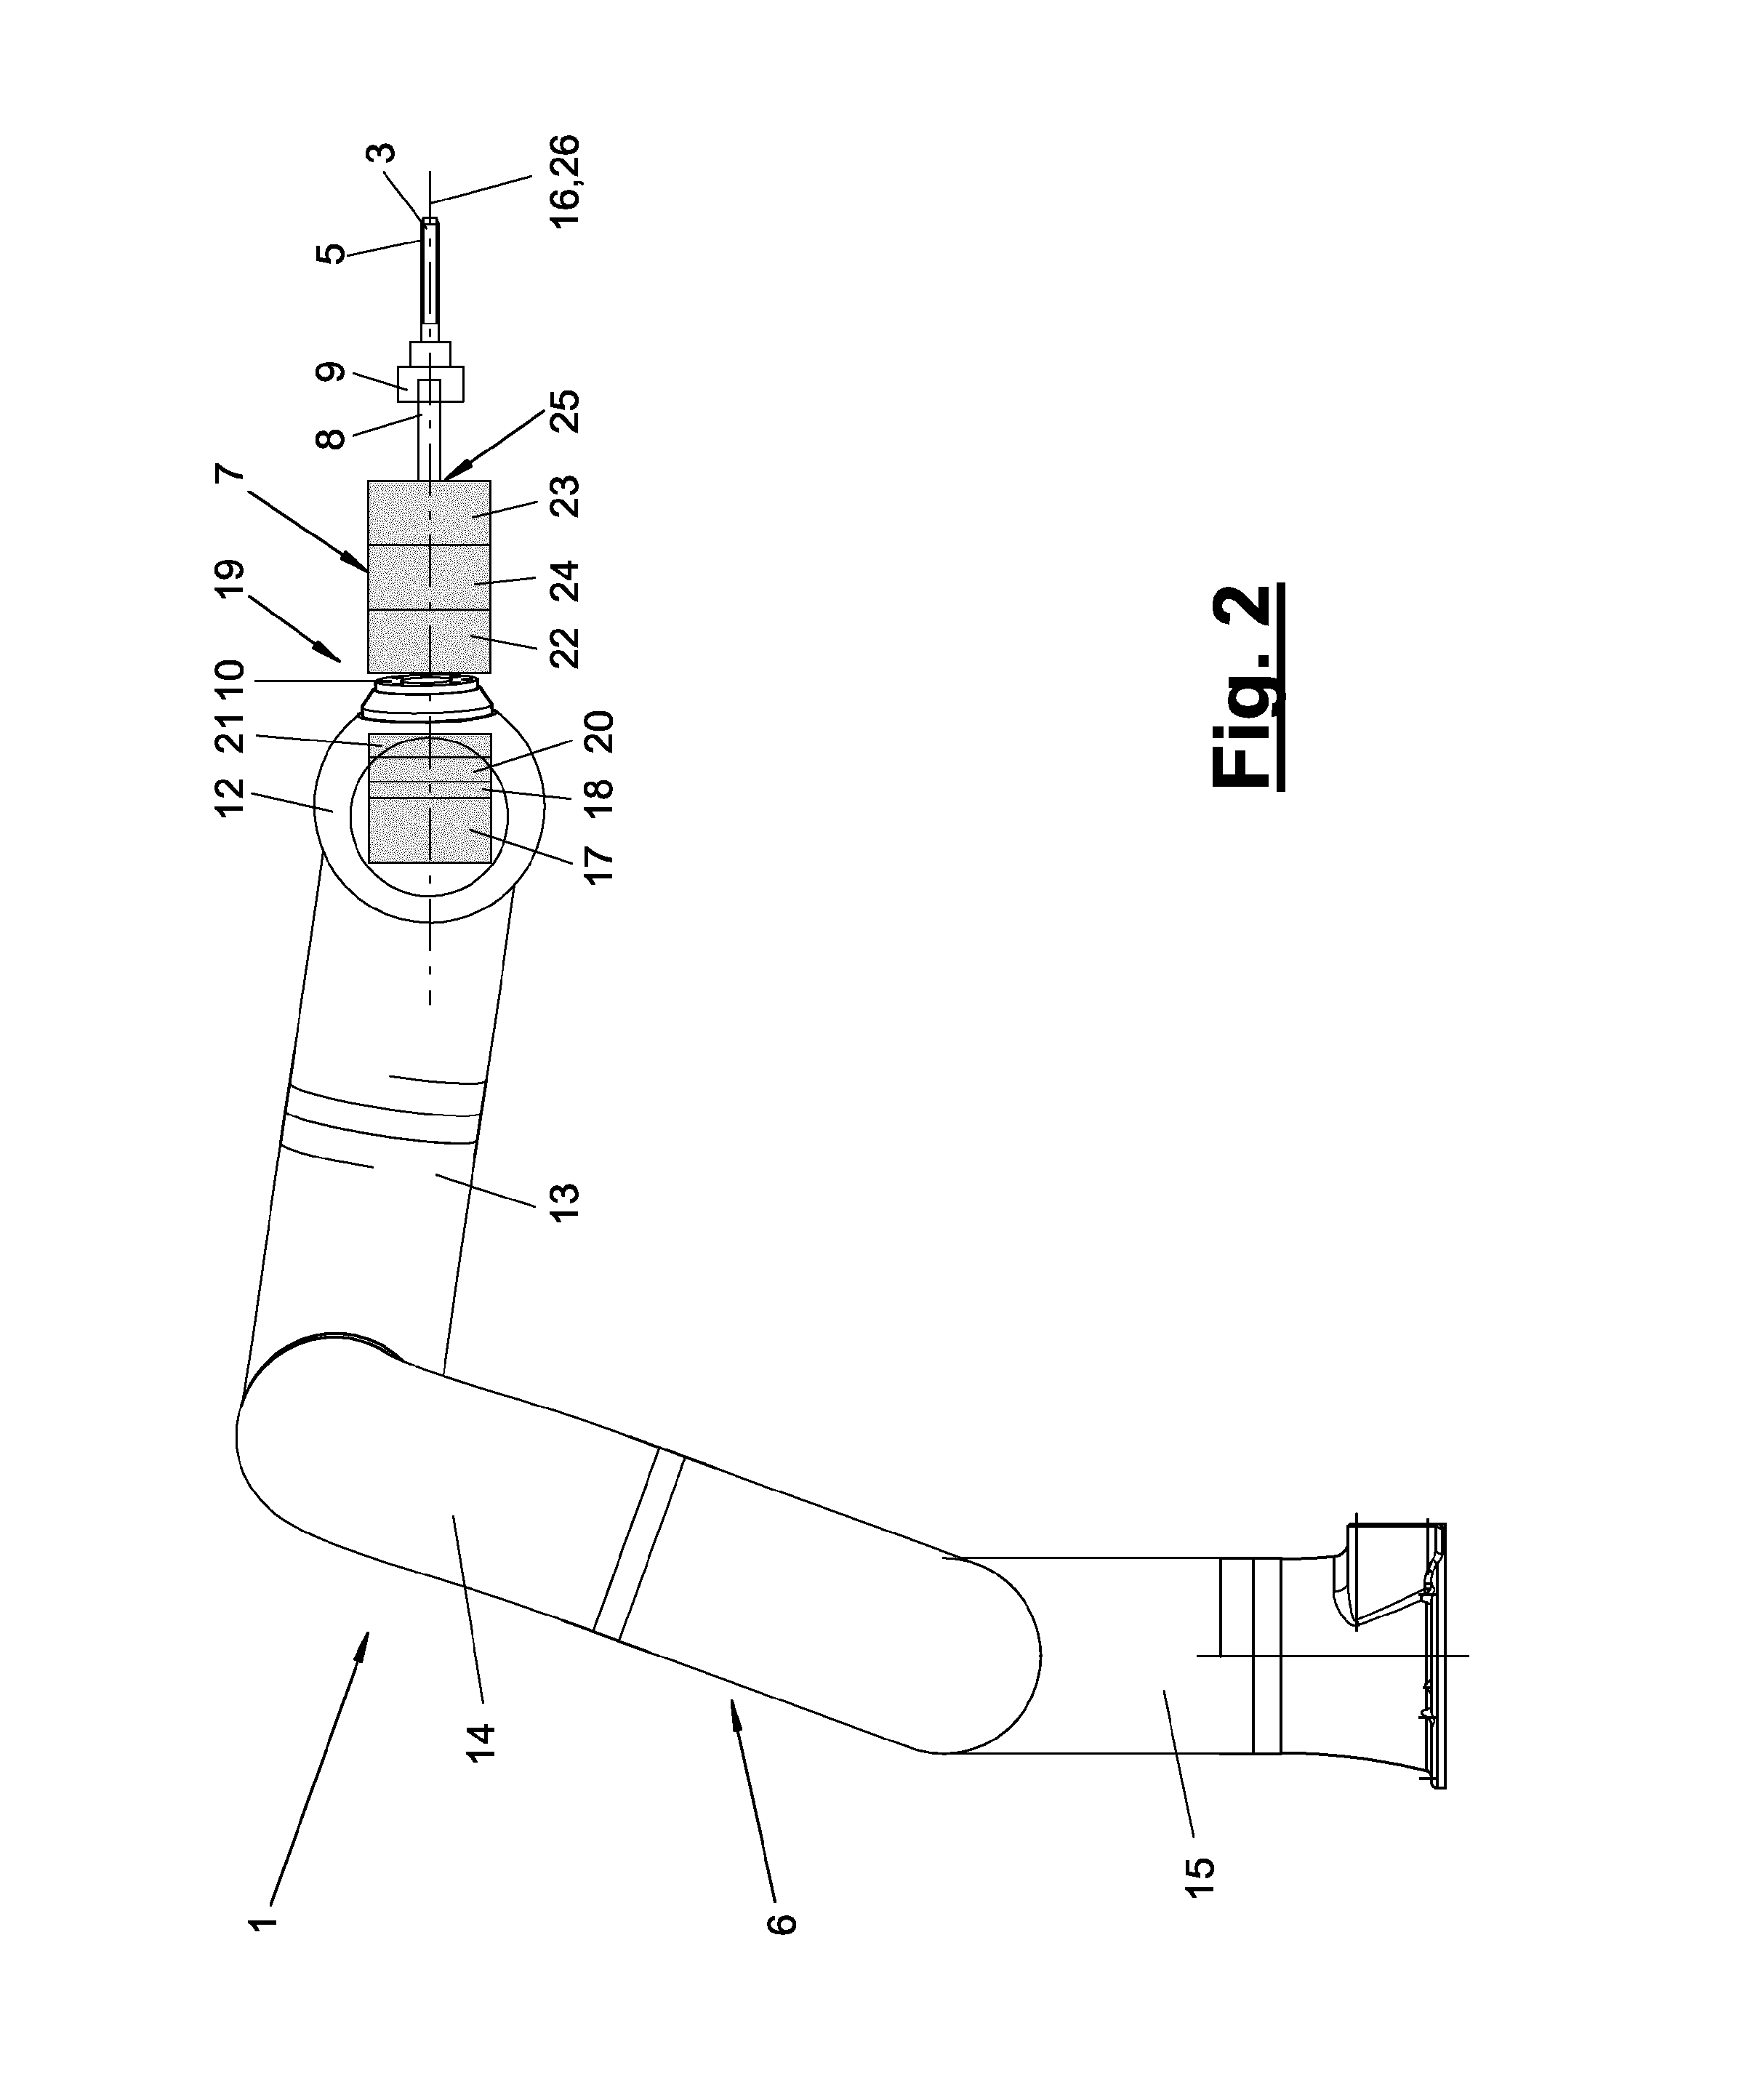 Working device and method